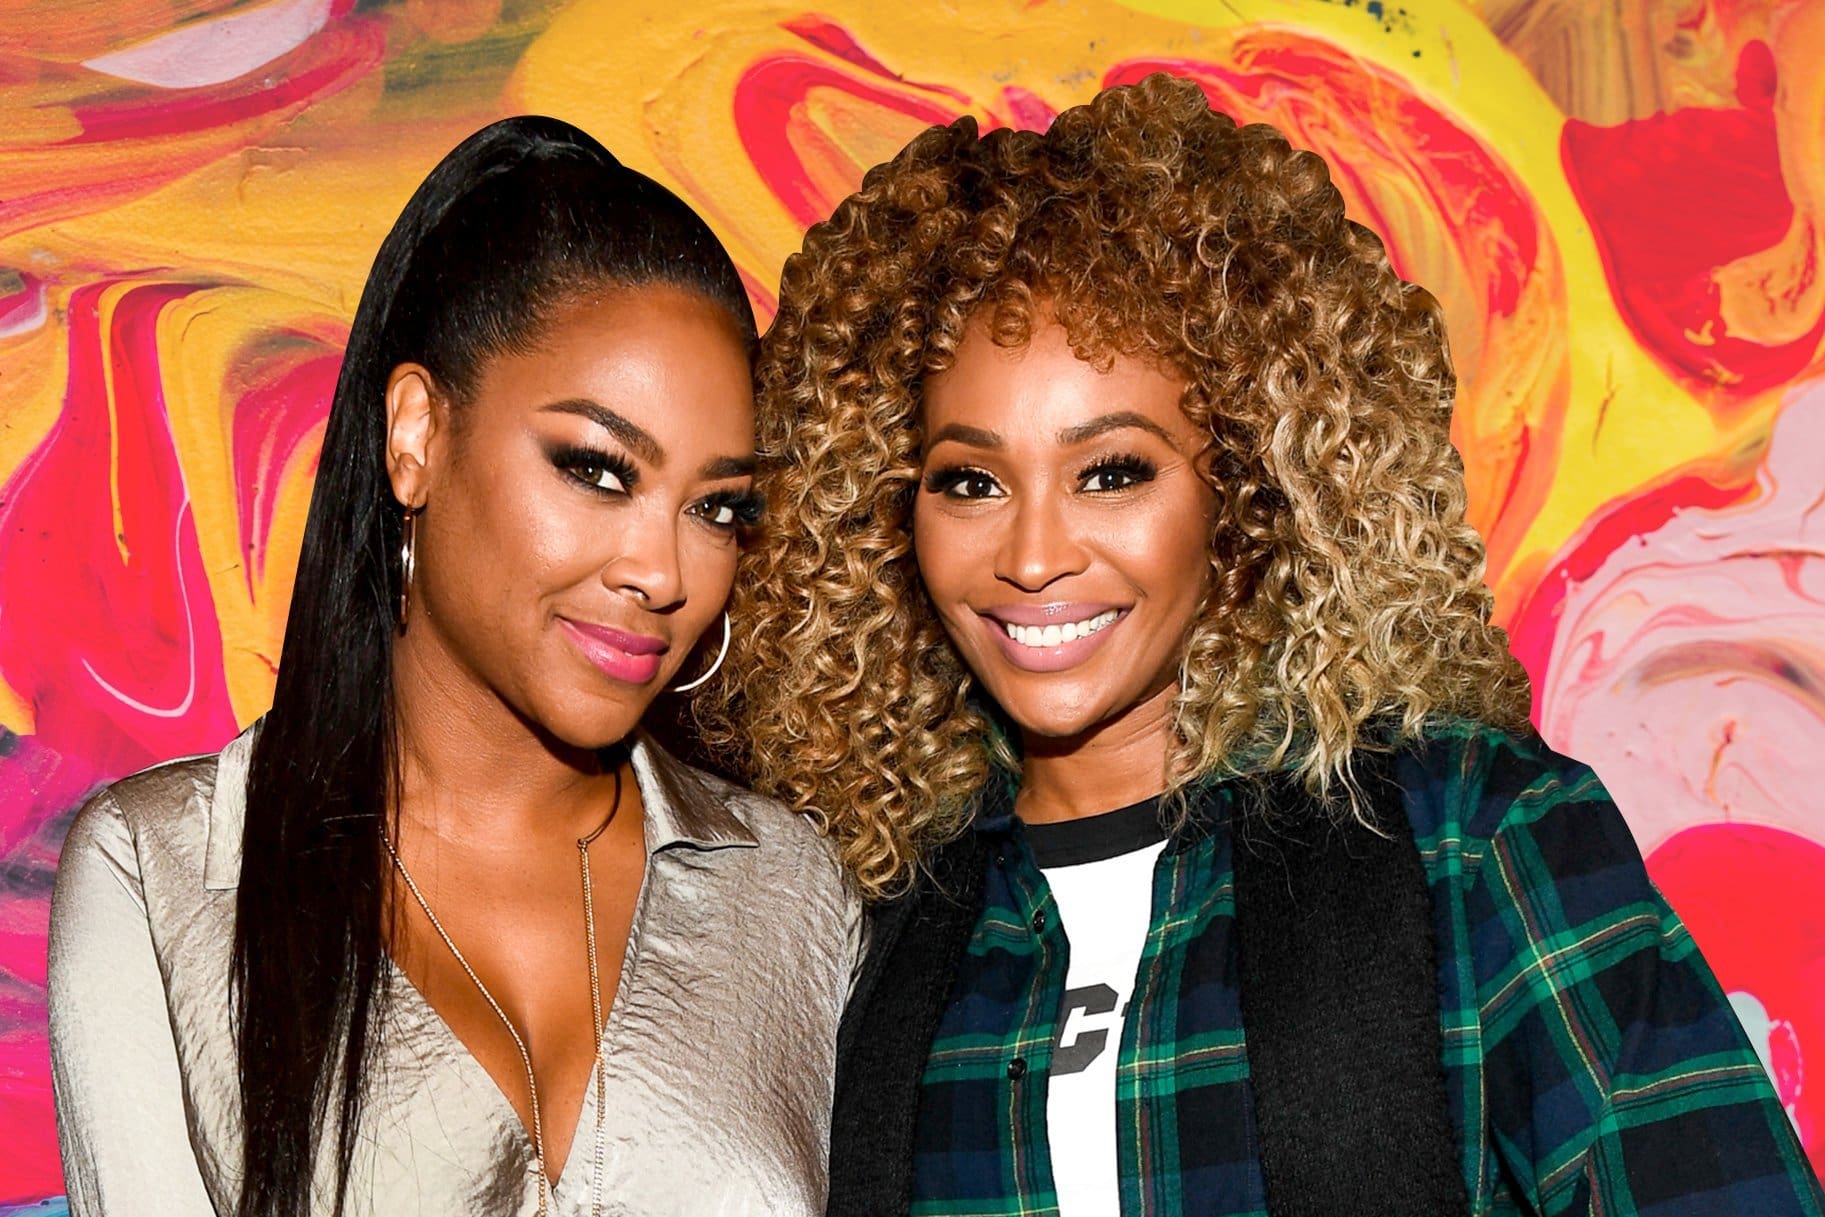 Cynthia Bailey And Kenya Moore Have Fans' Jaws Dropping With These Moves